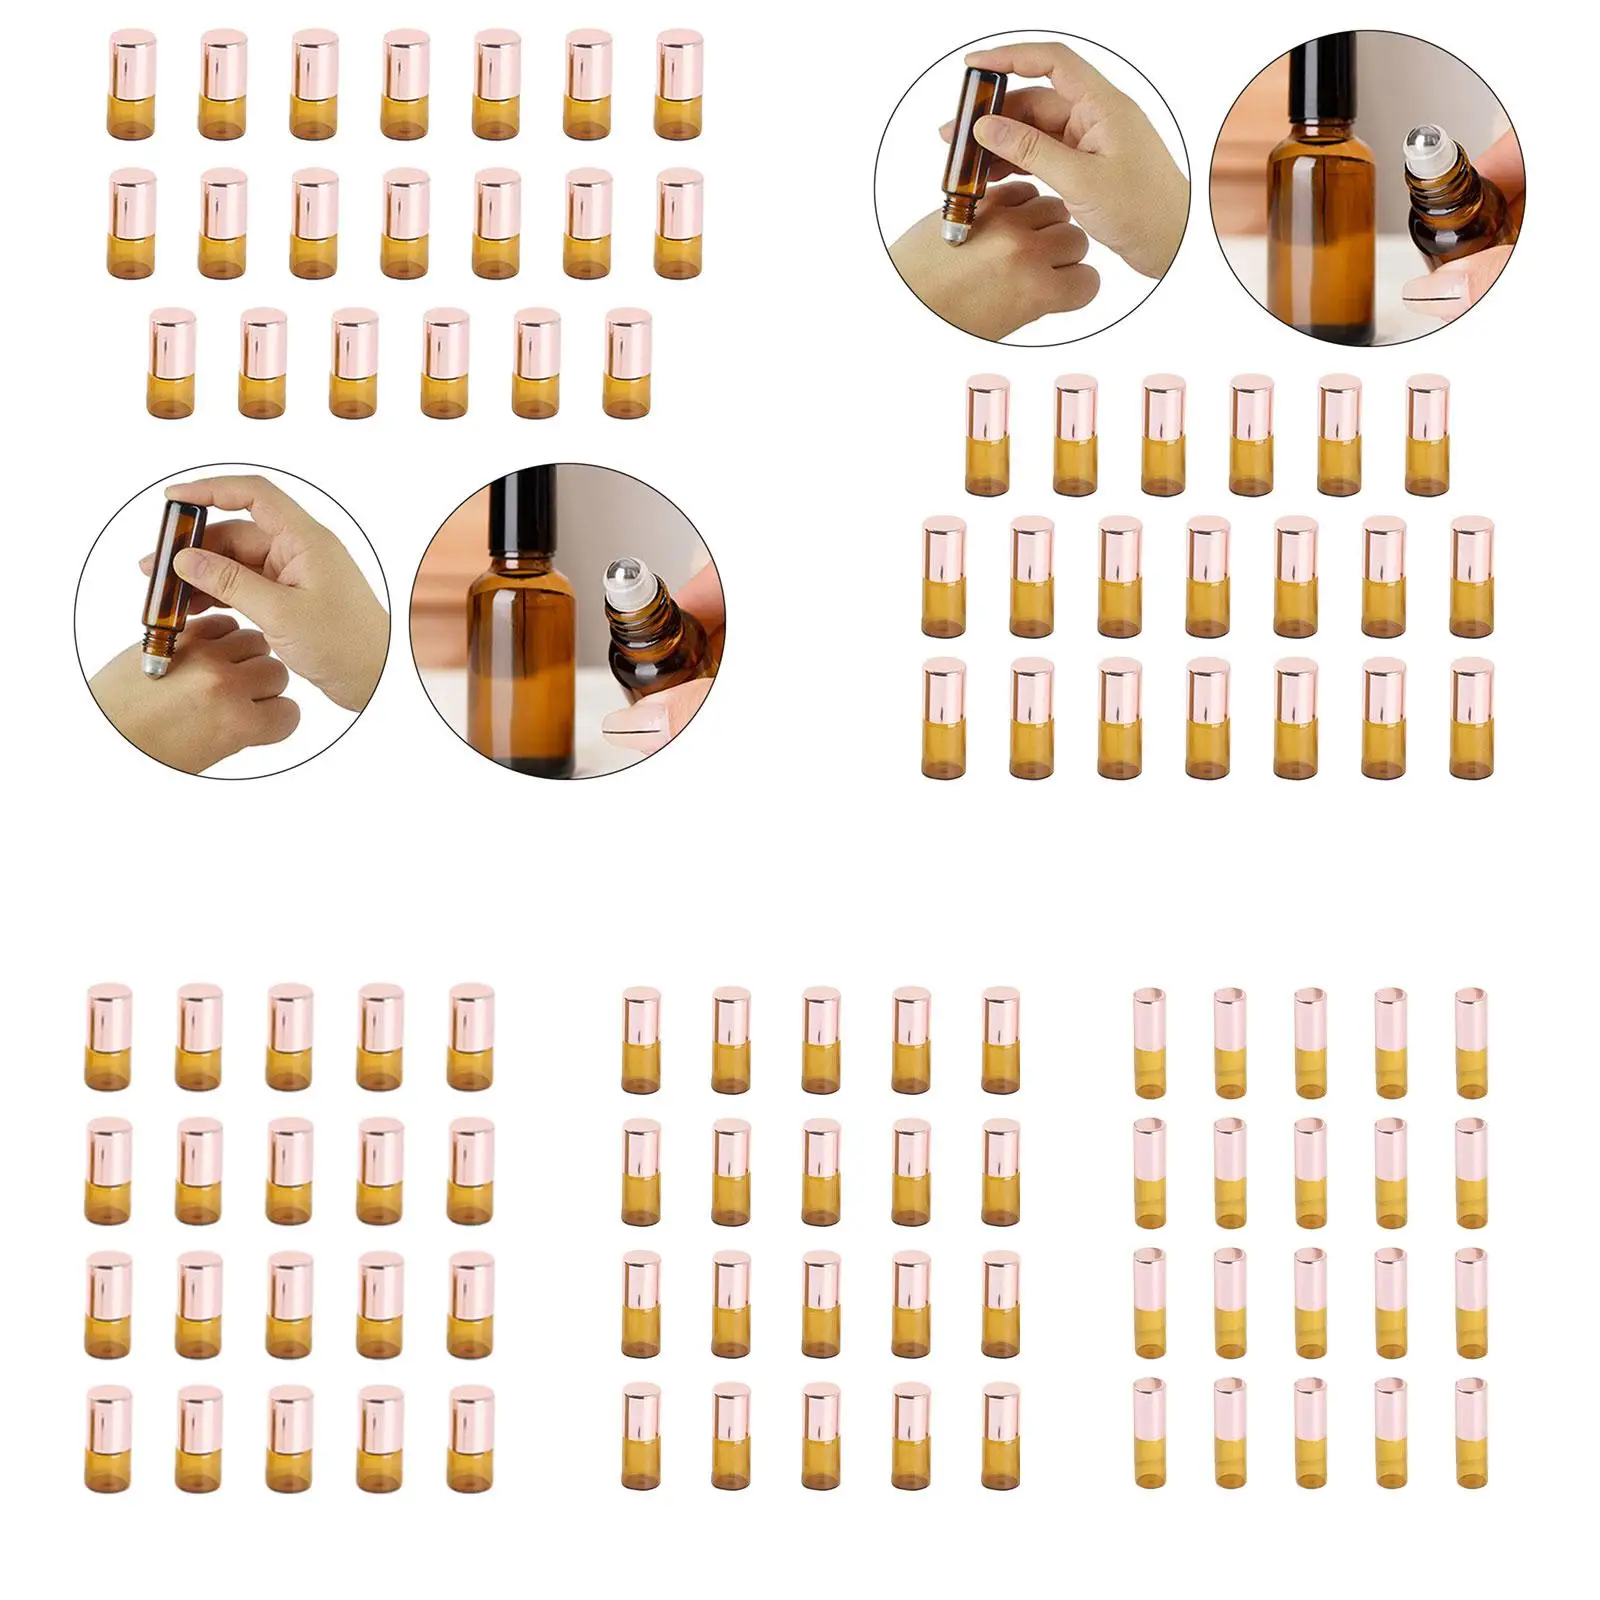 20 Pieces Empty Amber Glass Roller Ball Bottles Holder Accessories for Cosmetic Makeup Sample Portable travel Size